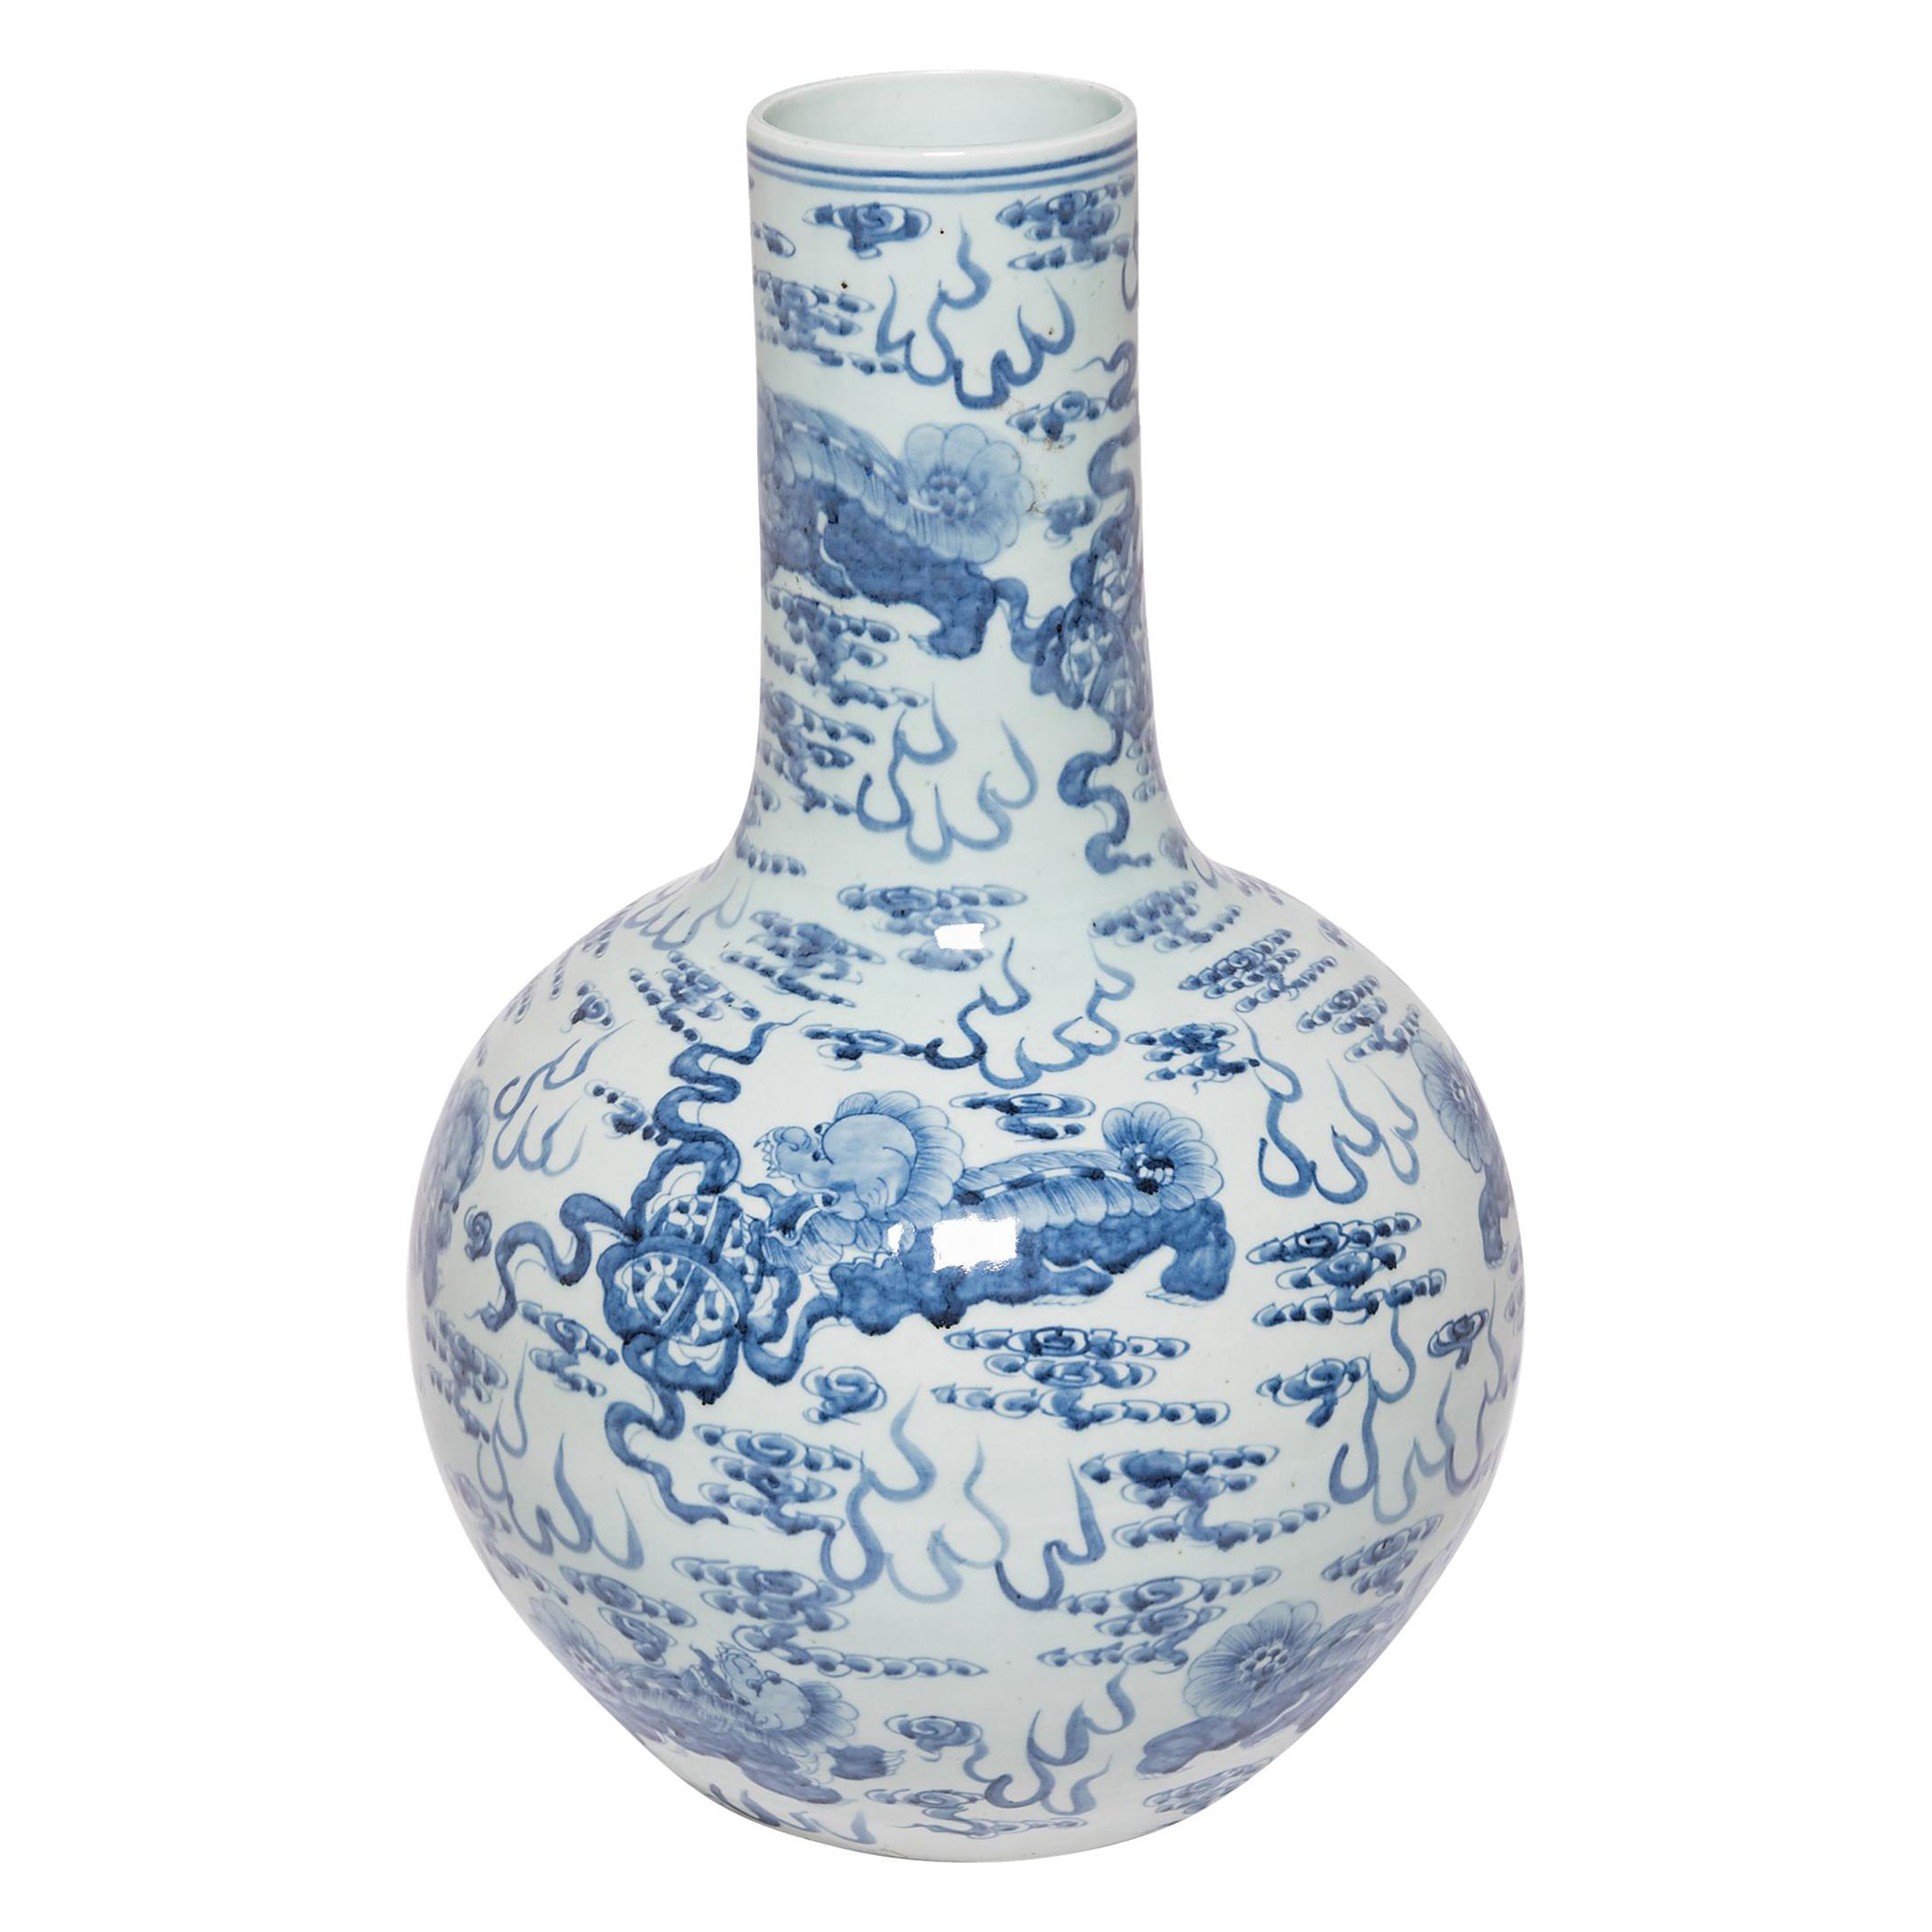 Large Blue and White Celestial Ball Vase with Fu Dogs For Sale